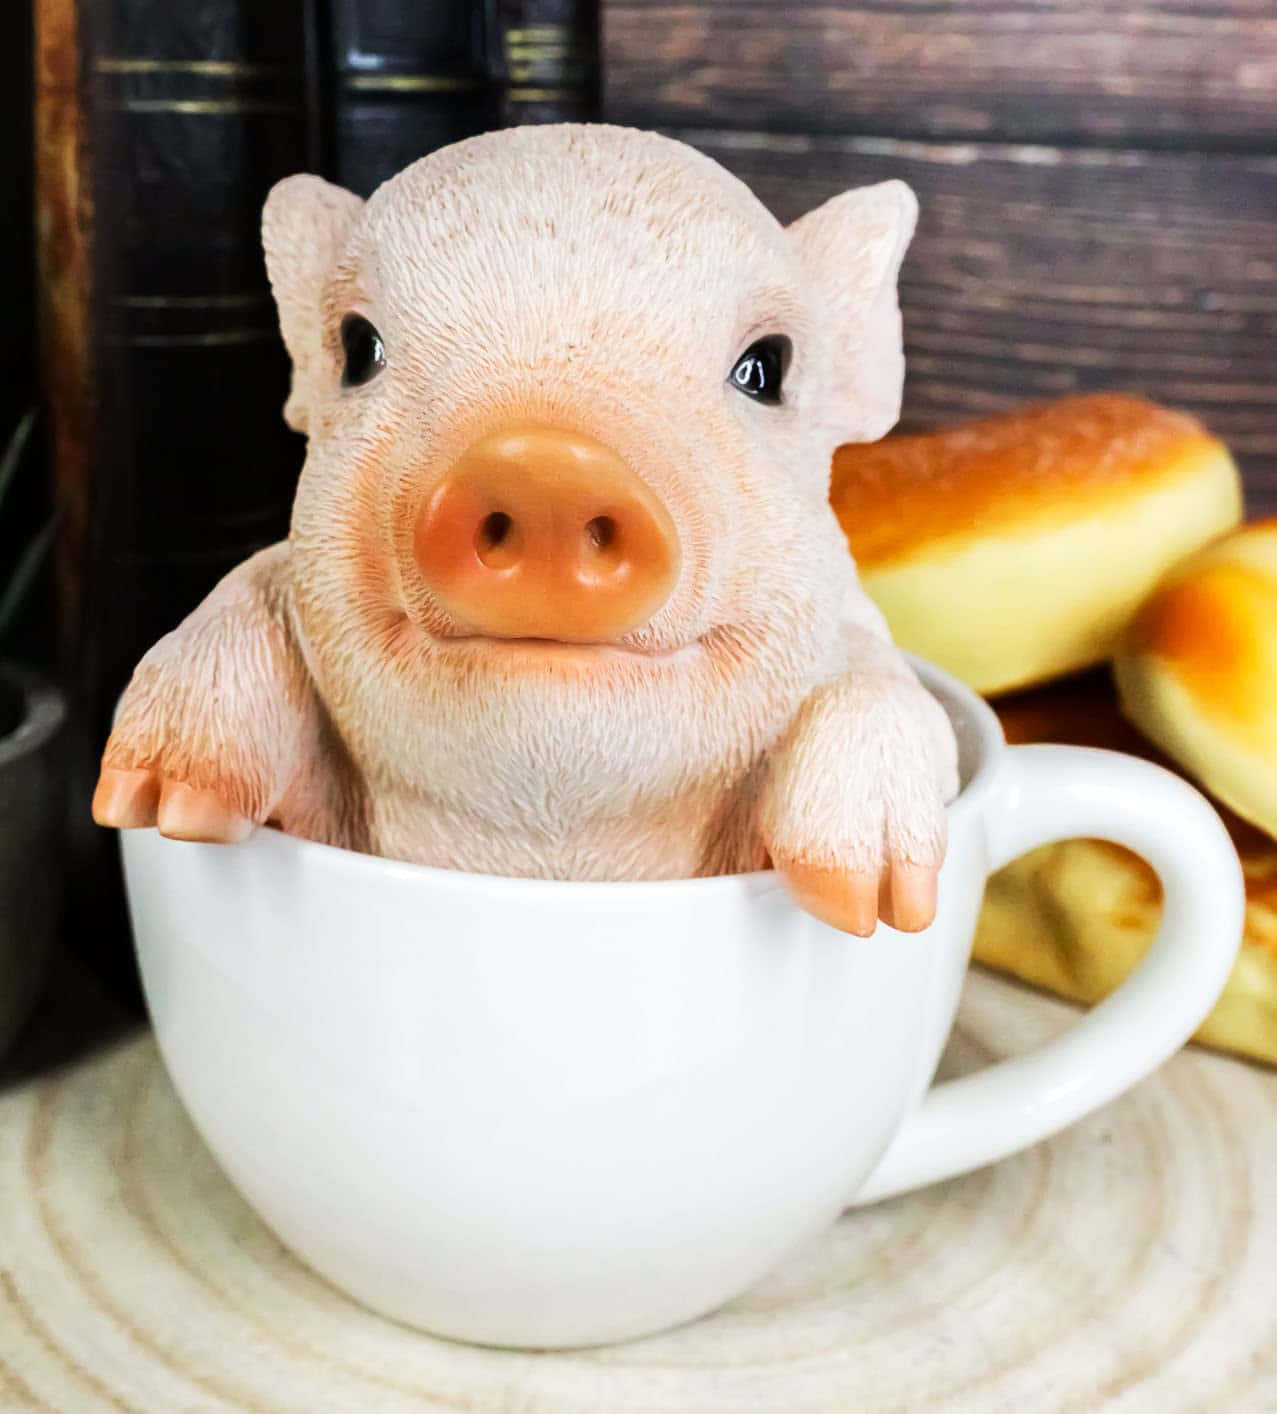 "This little piggy is full of cuteness!"